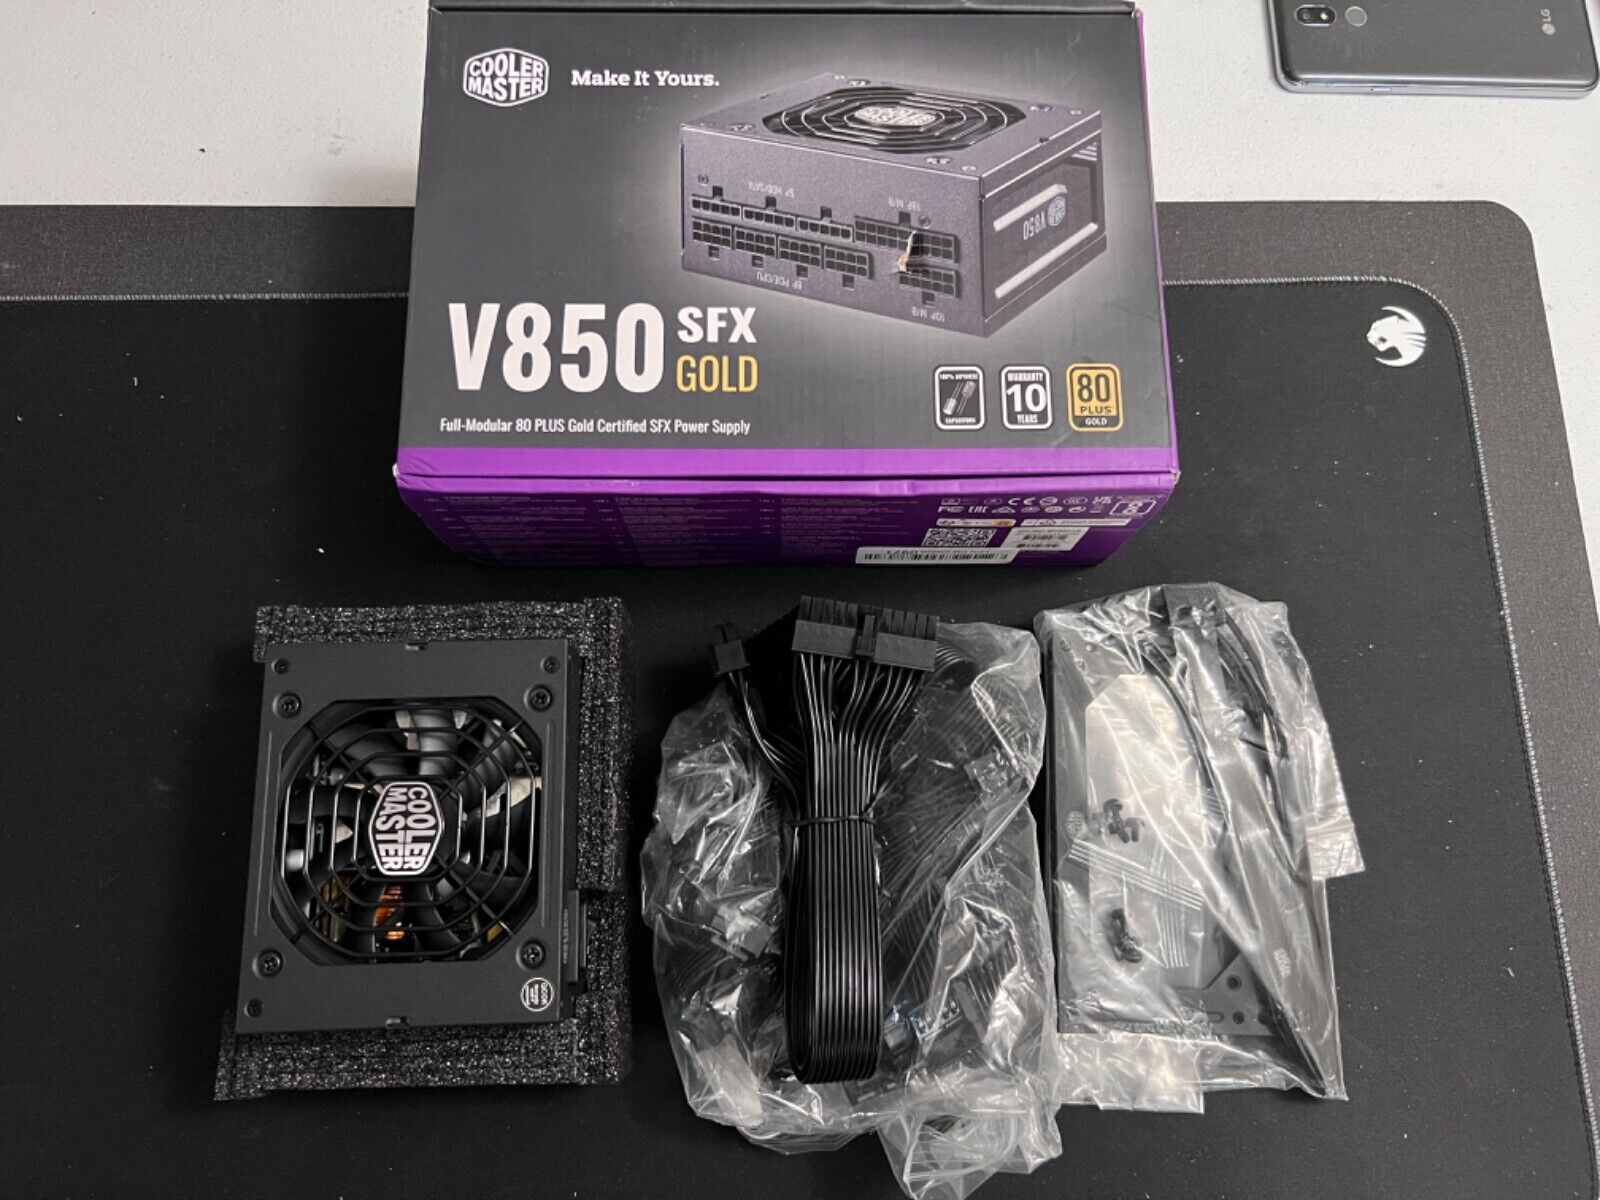 Cooler Master V850 850W 80 Plus Gold SFX Power Supply